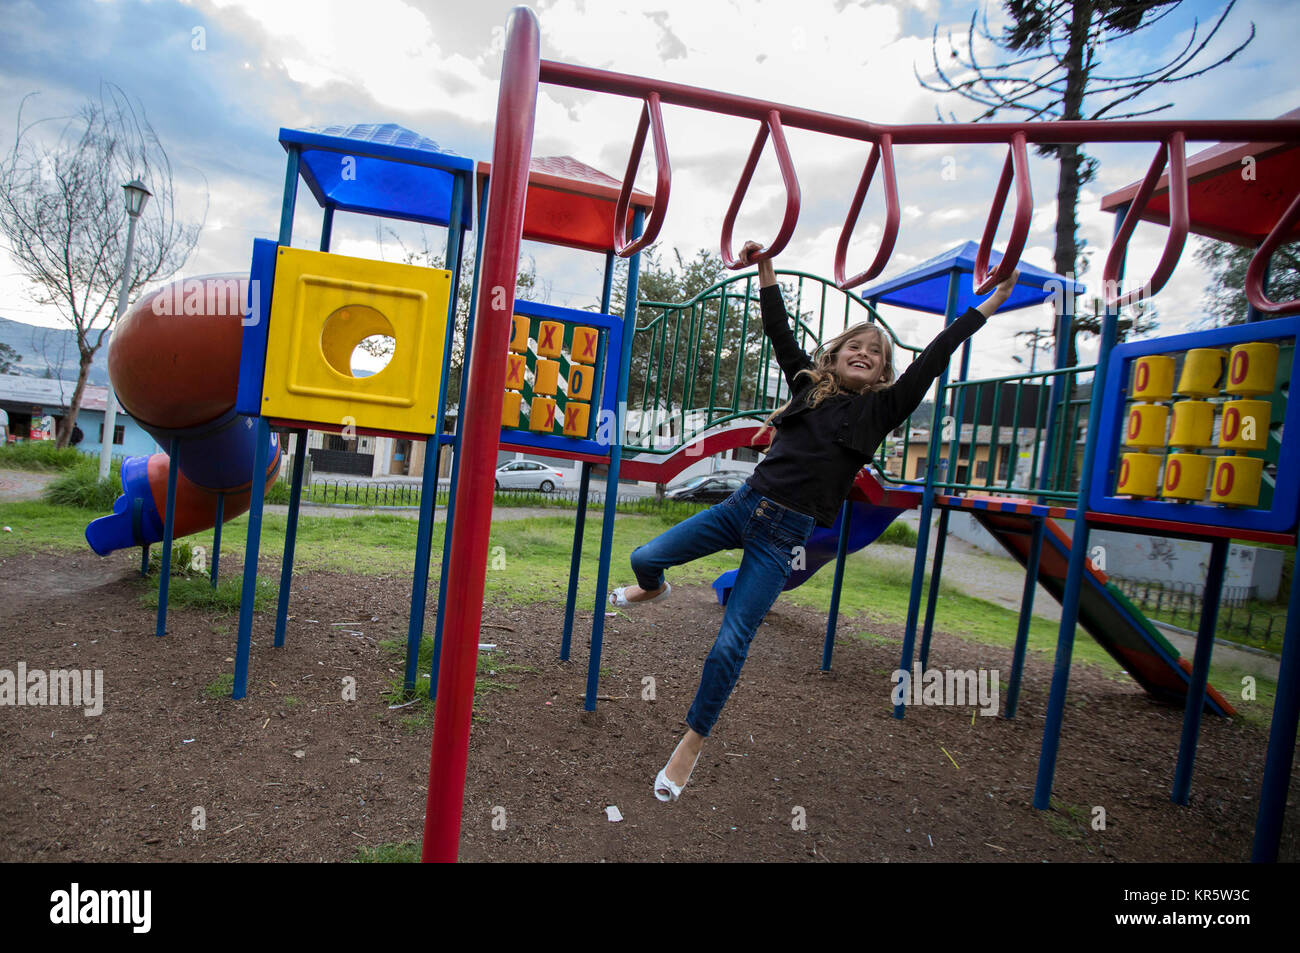 (171218) -- QUITO, Dec. 18, 2017 (Xinhua) -- Image taken on Dec. 15, 2017 shows Nathaly Ferreira Duarte playing in a park near her home in Quito, capital of Ecuador. Nathaly Ferreira Duarte and her mother Muriel Tugne Ferreira came to Ecuador from Brazil two years ago because of the economic crisis. Muriel works now as a manager at a store that sells movies and provides technical service for smartphones. The General Assembly of the United Nations proclaimed December 18 as International Migrants Day on Dec. 4, 2000. (Xinhua/Santiago Armas) (rtg) (ah)(yy) Stock Photo